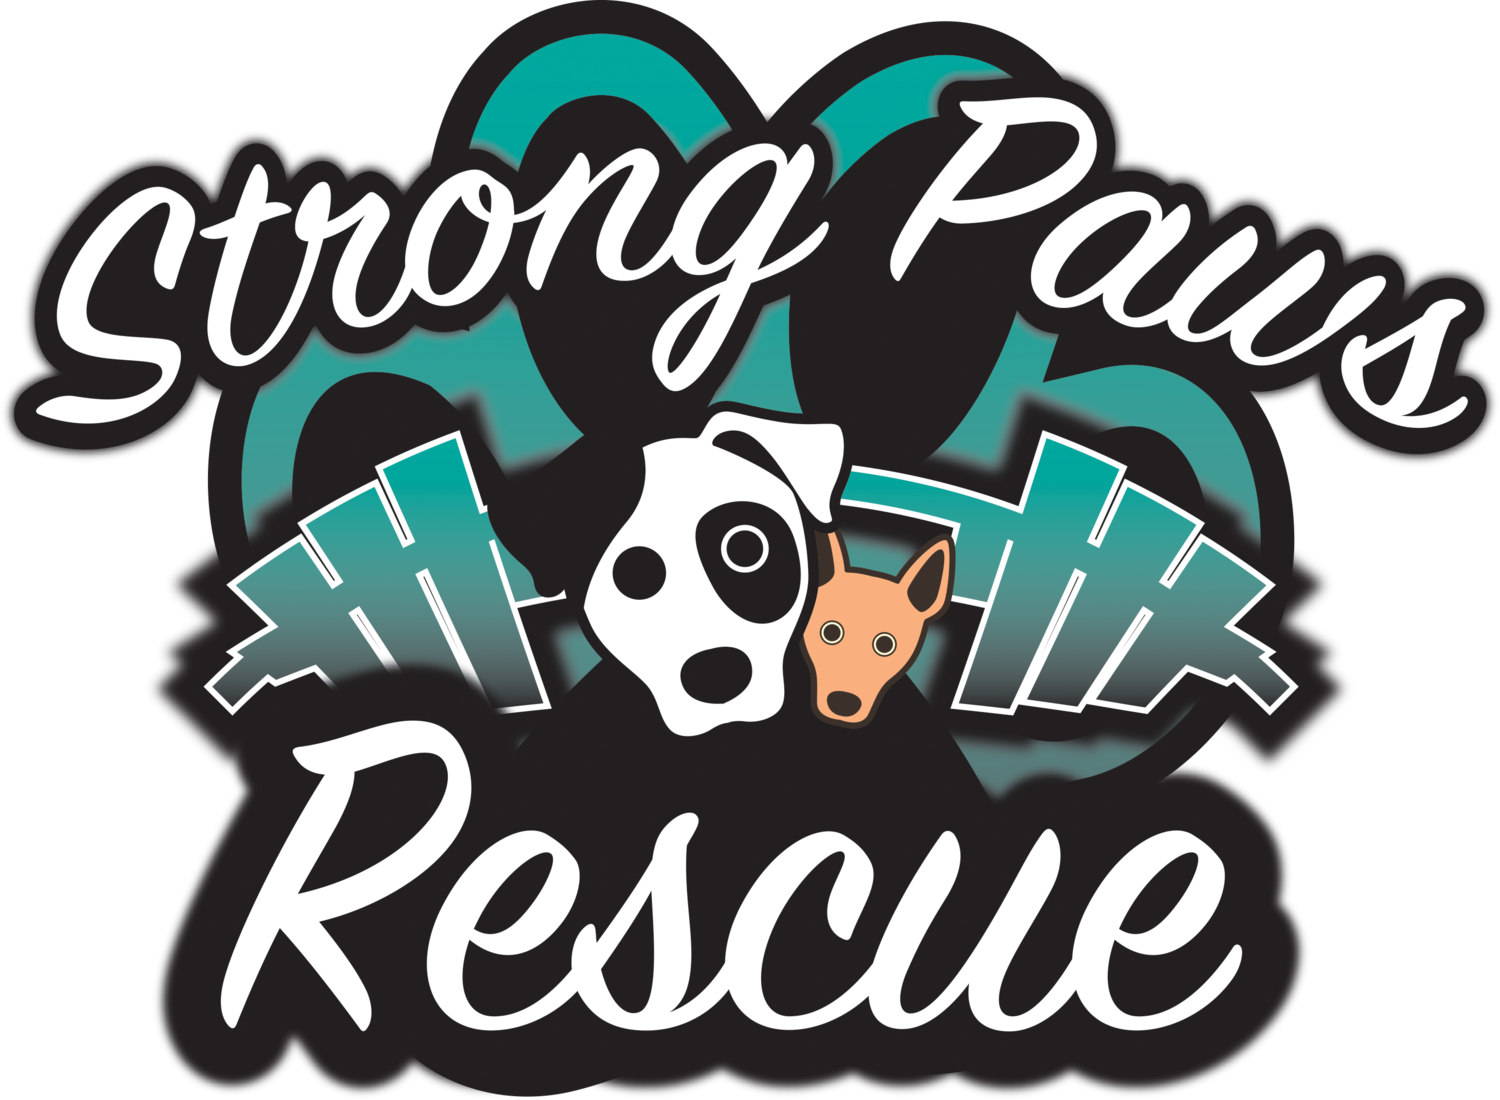 Strong Paws Rescue, Inc.